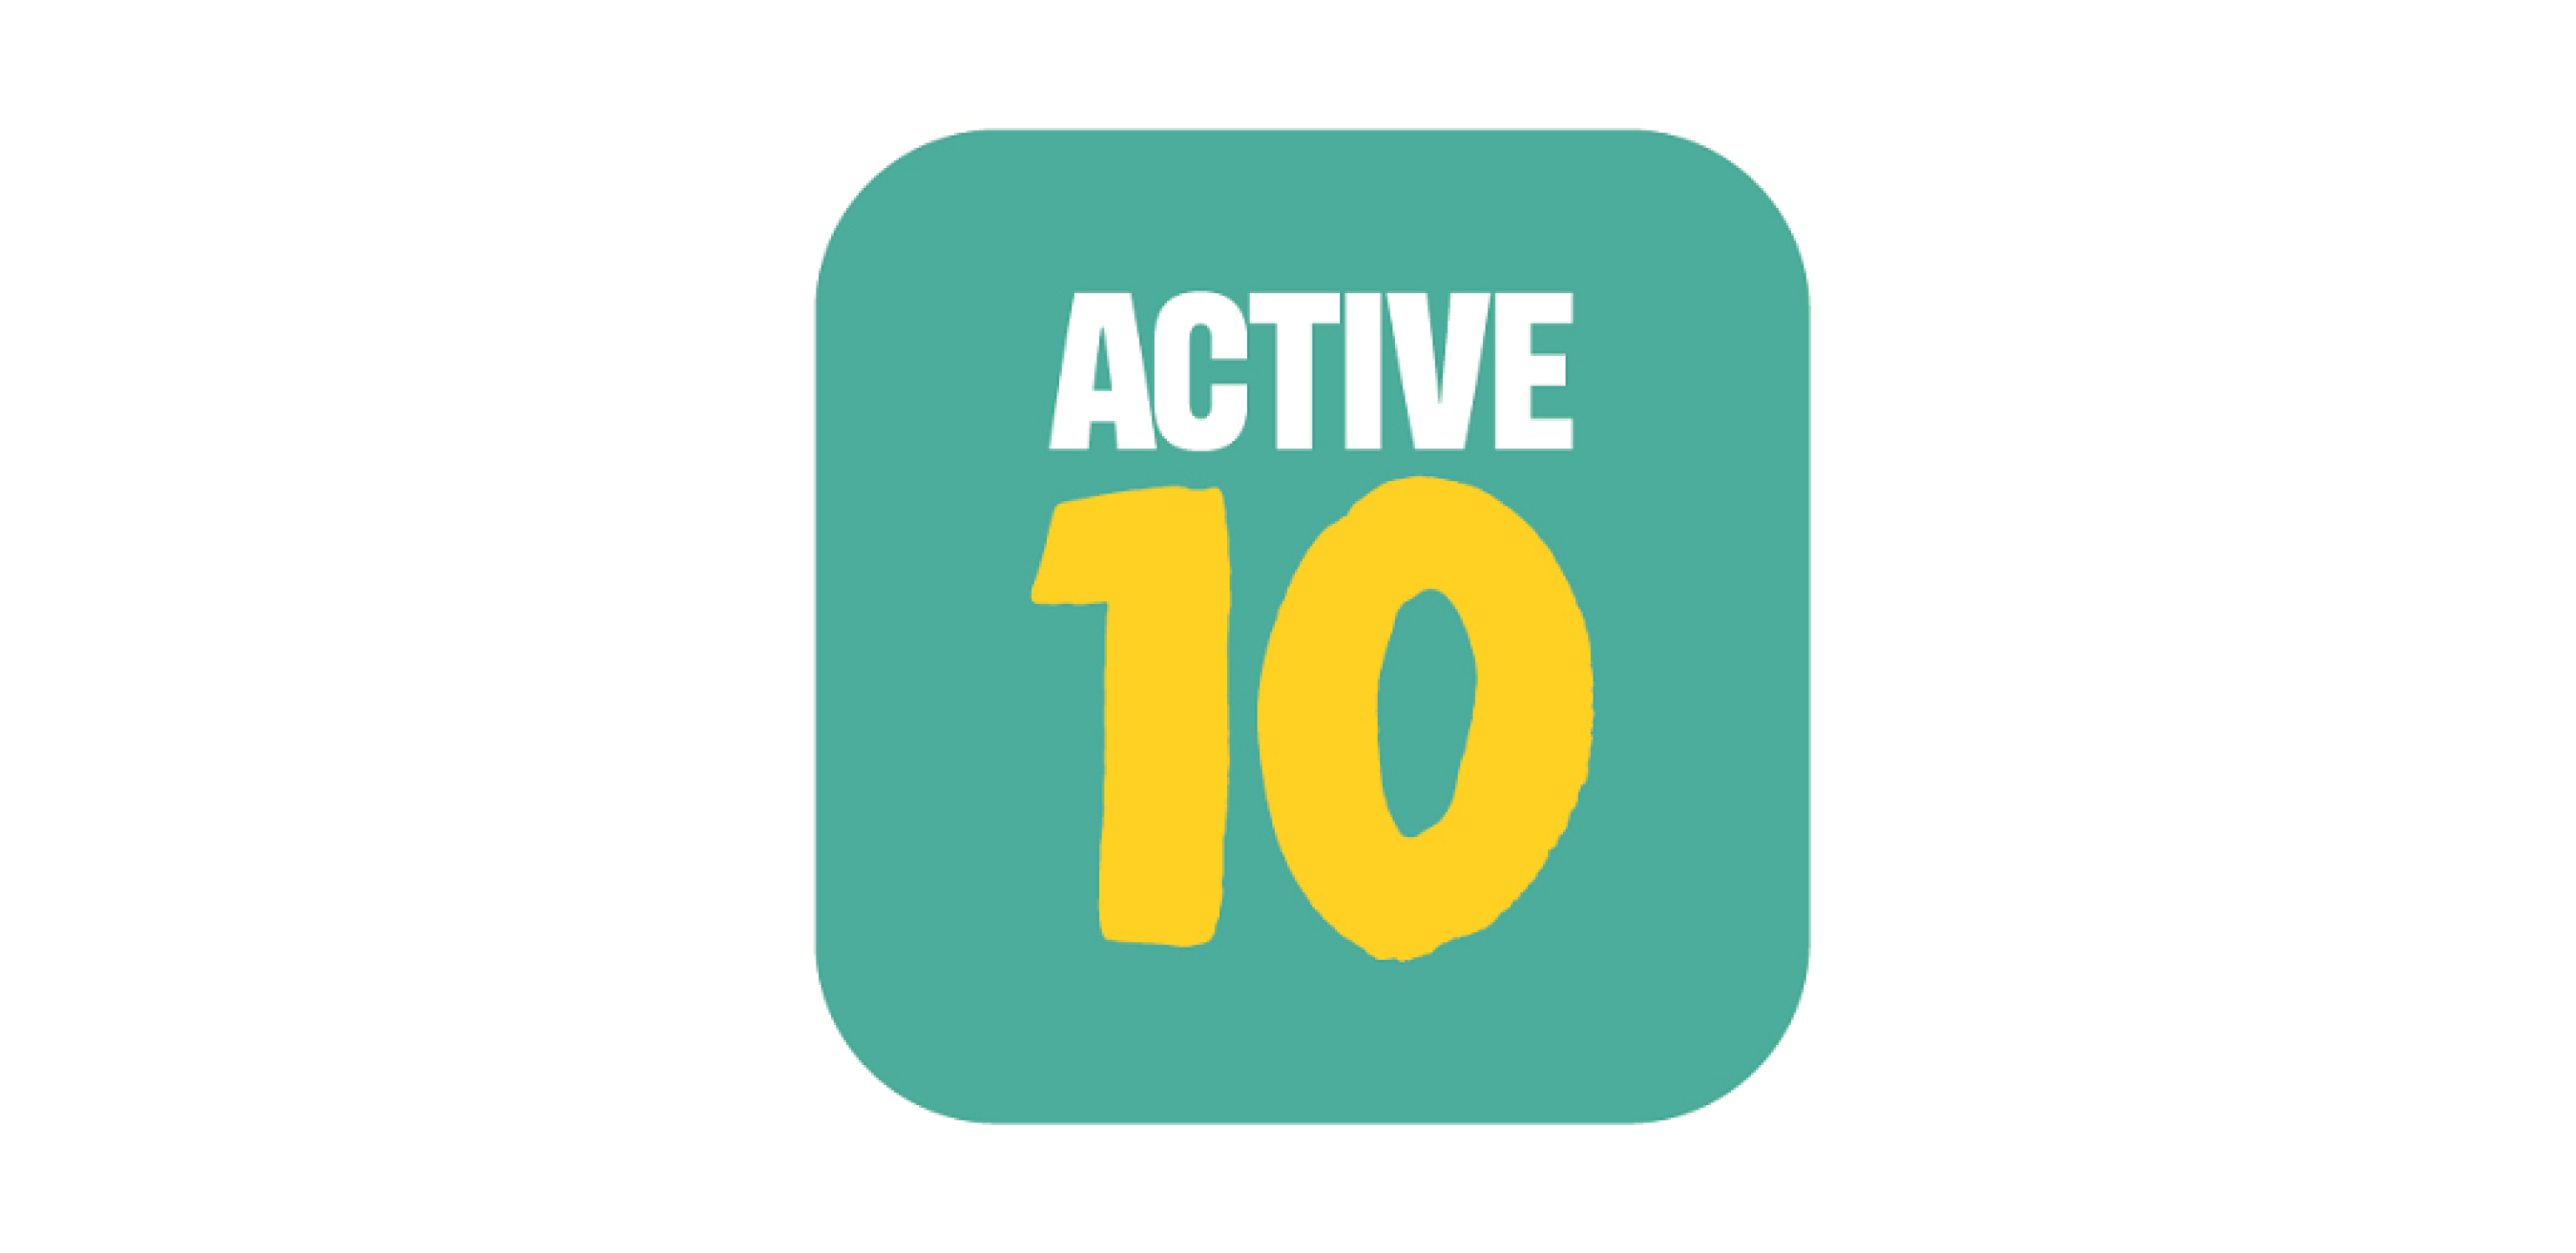 Active 10 Functional Testing - Public Health England